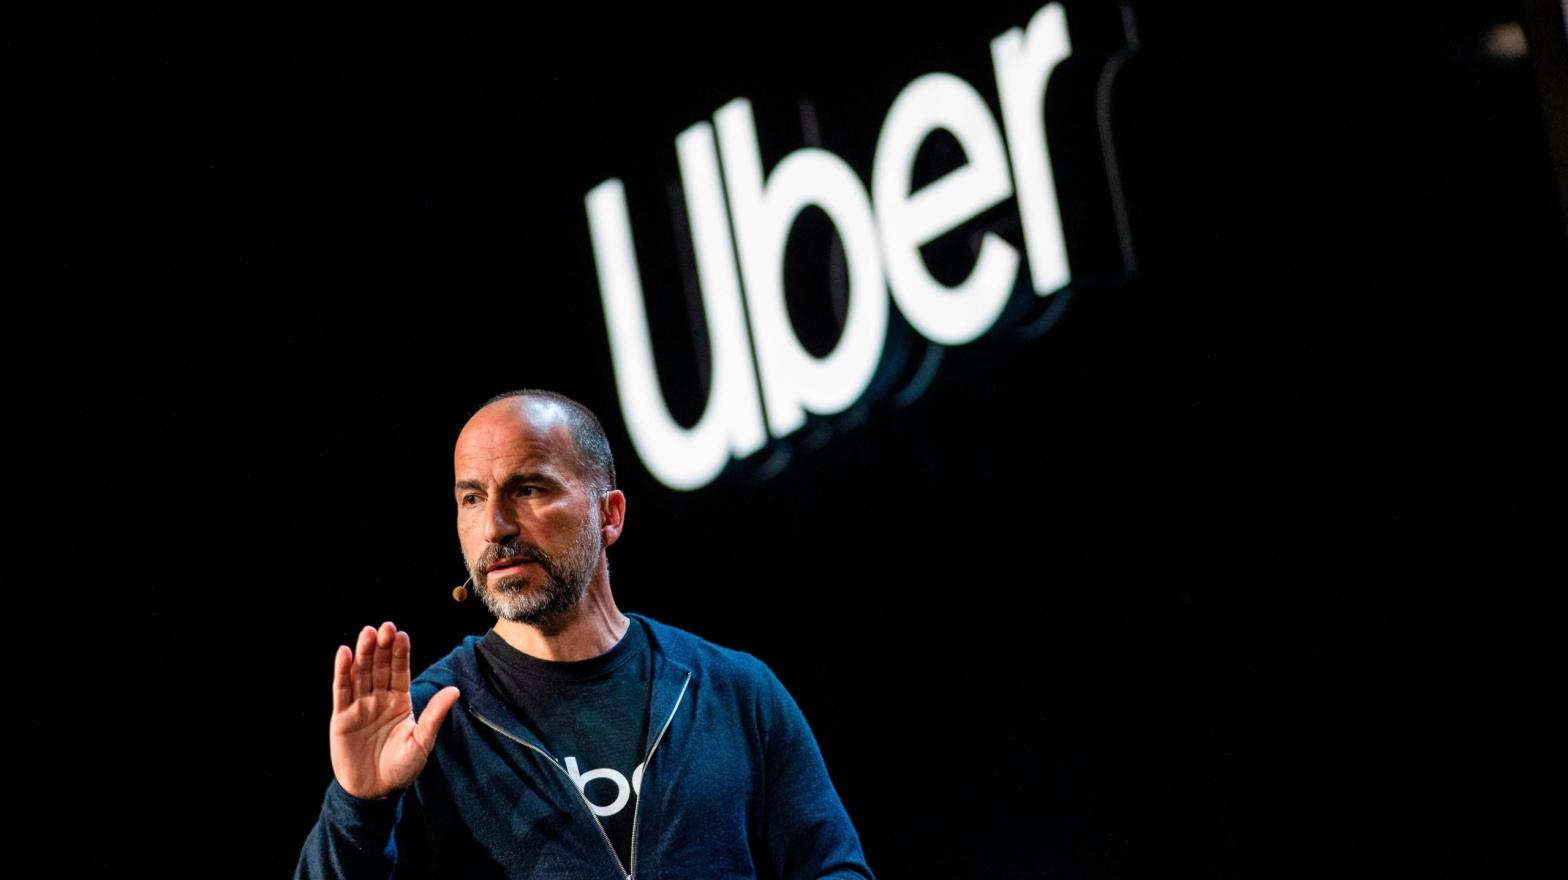 Uber CEO Dara Khosrowshahi addresses the audience during the keynote at the start an Uber products launch in San Francisco, California on September 26, 2019. (Photo: Philip Pacheco / AFP, Getty Images)